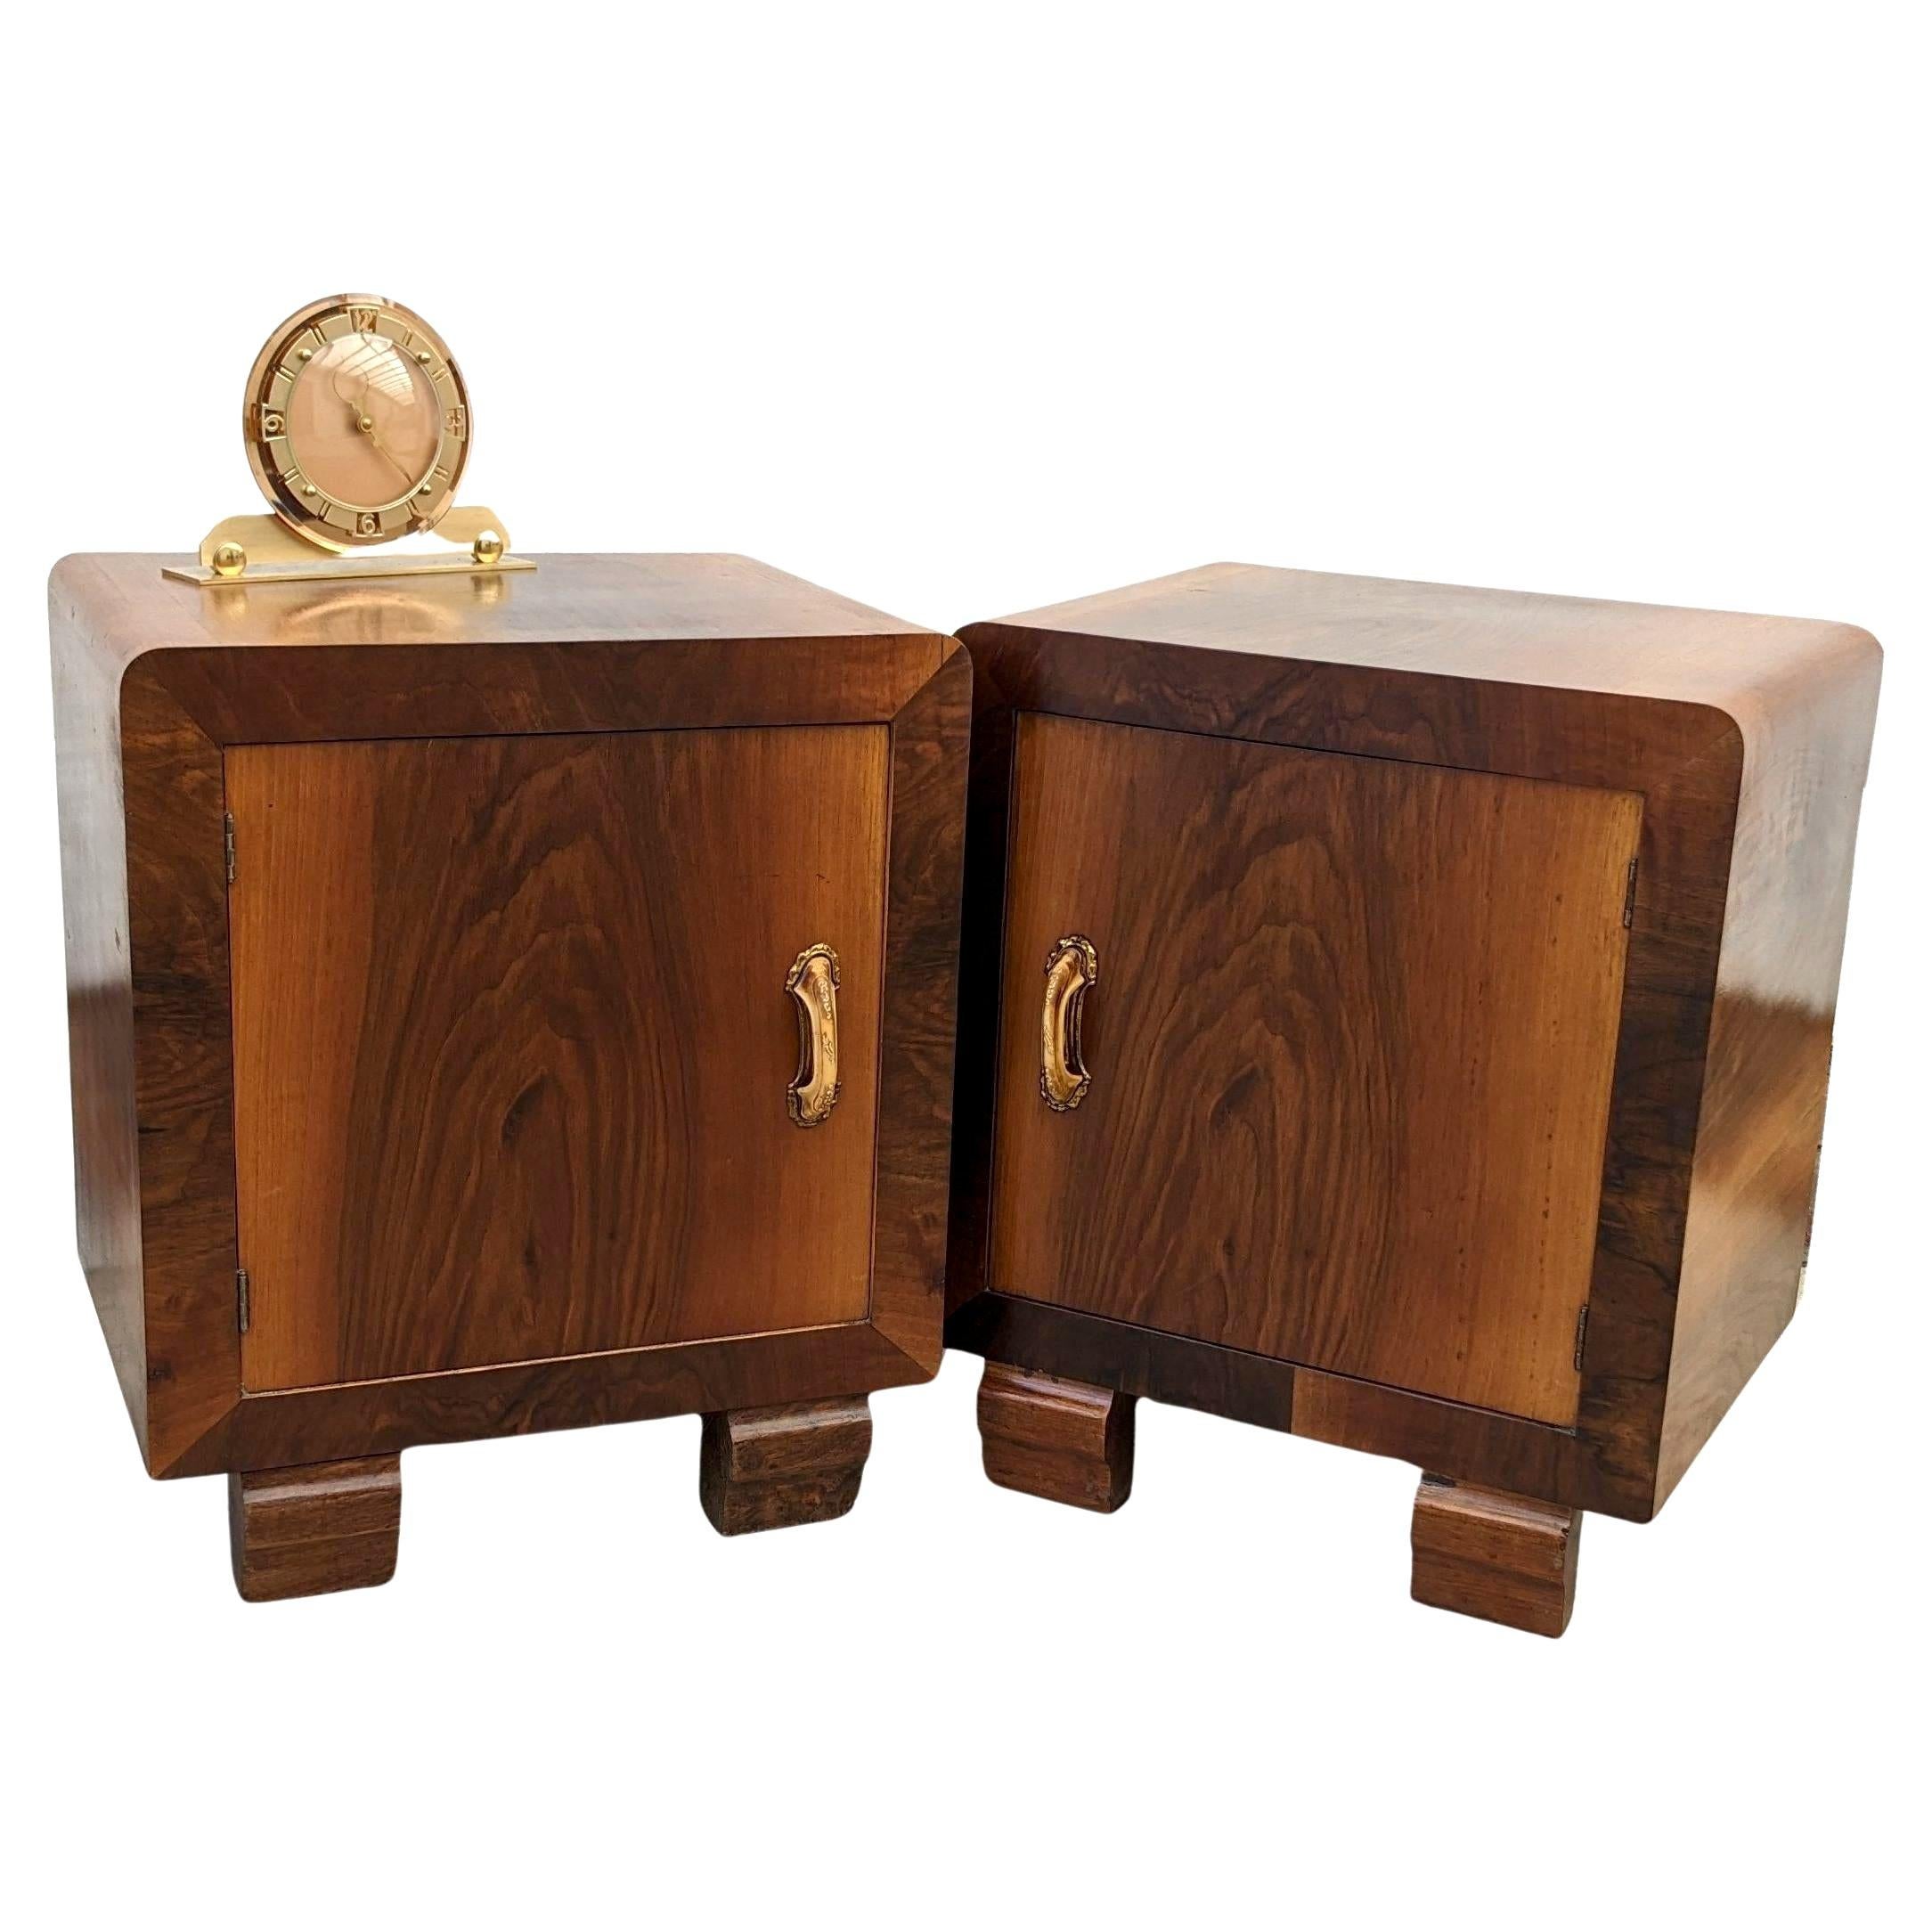 20th Century Art Deco Modernist Pair Matching of Italian Bedside Table Nightstands, c1930 For Sale